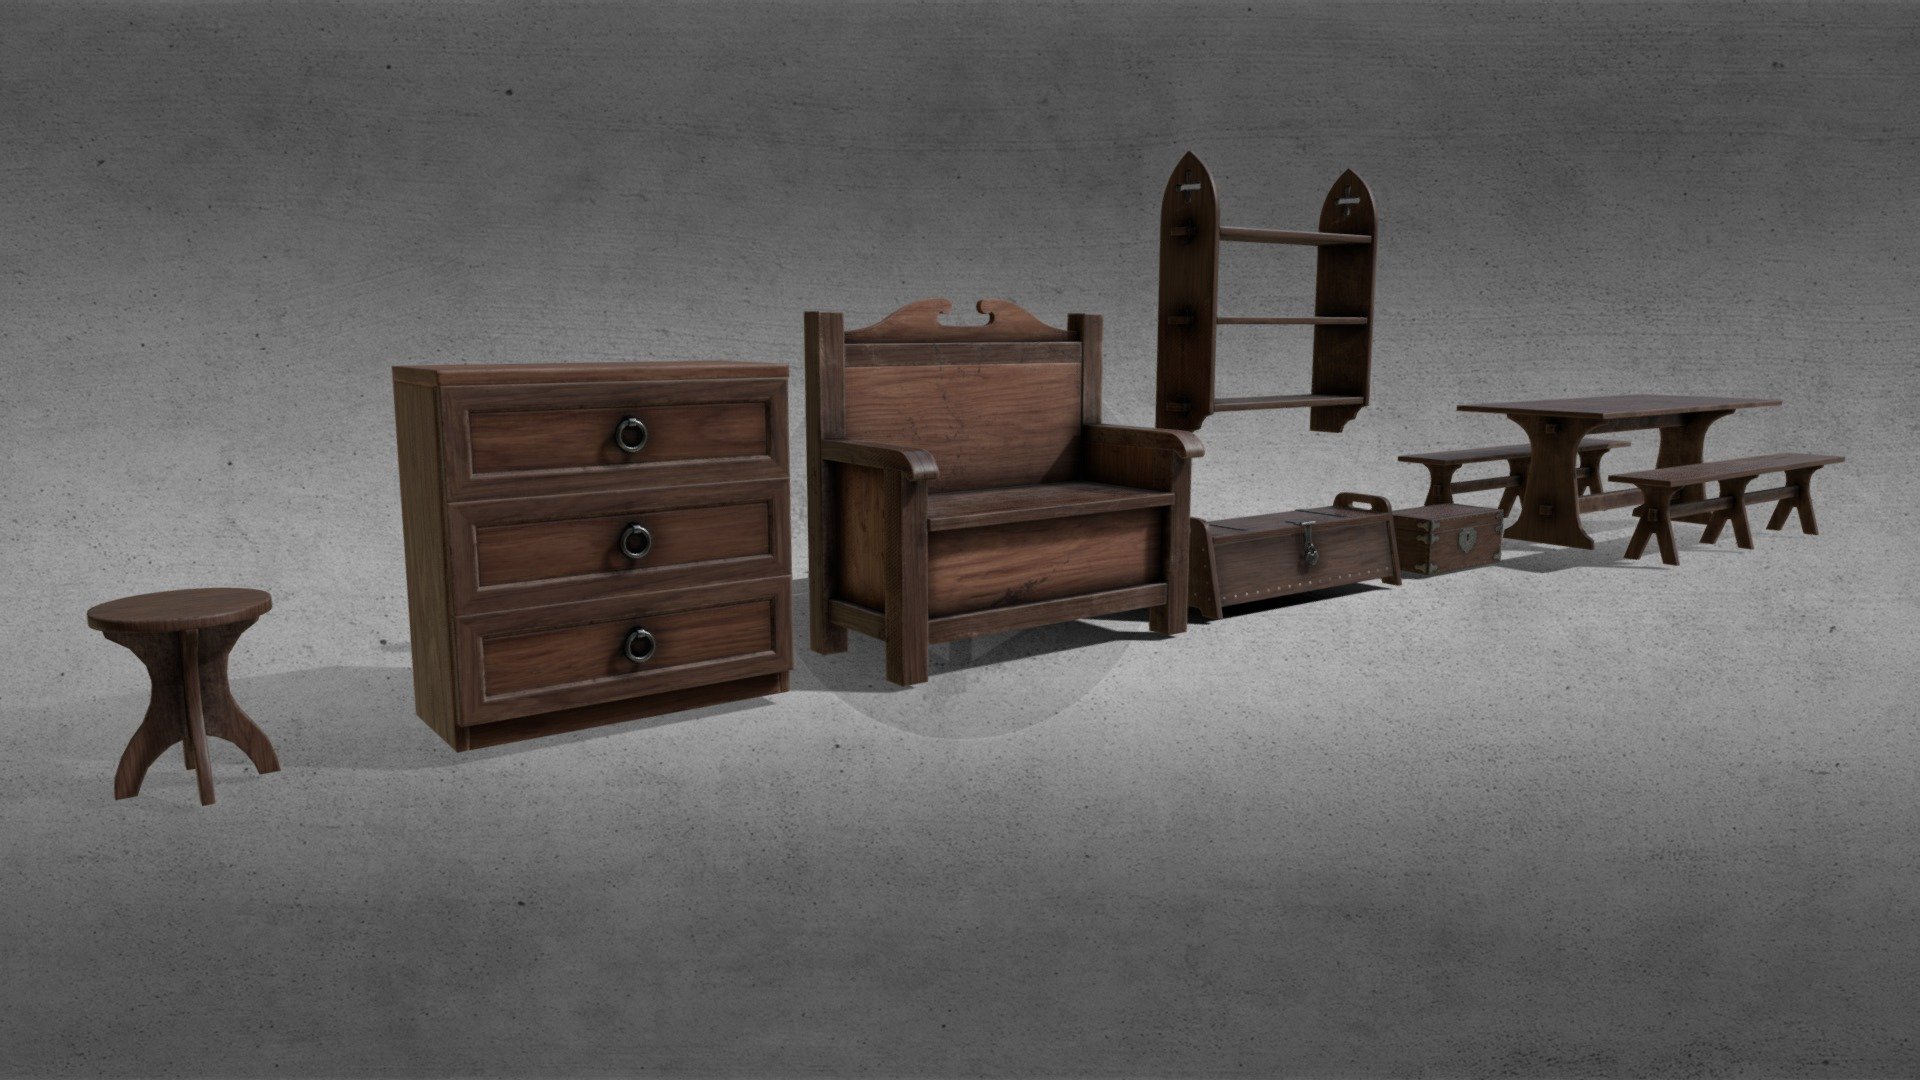 A pack of low poly medieval-style assets.
Furniture, chests, etc 3d model